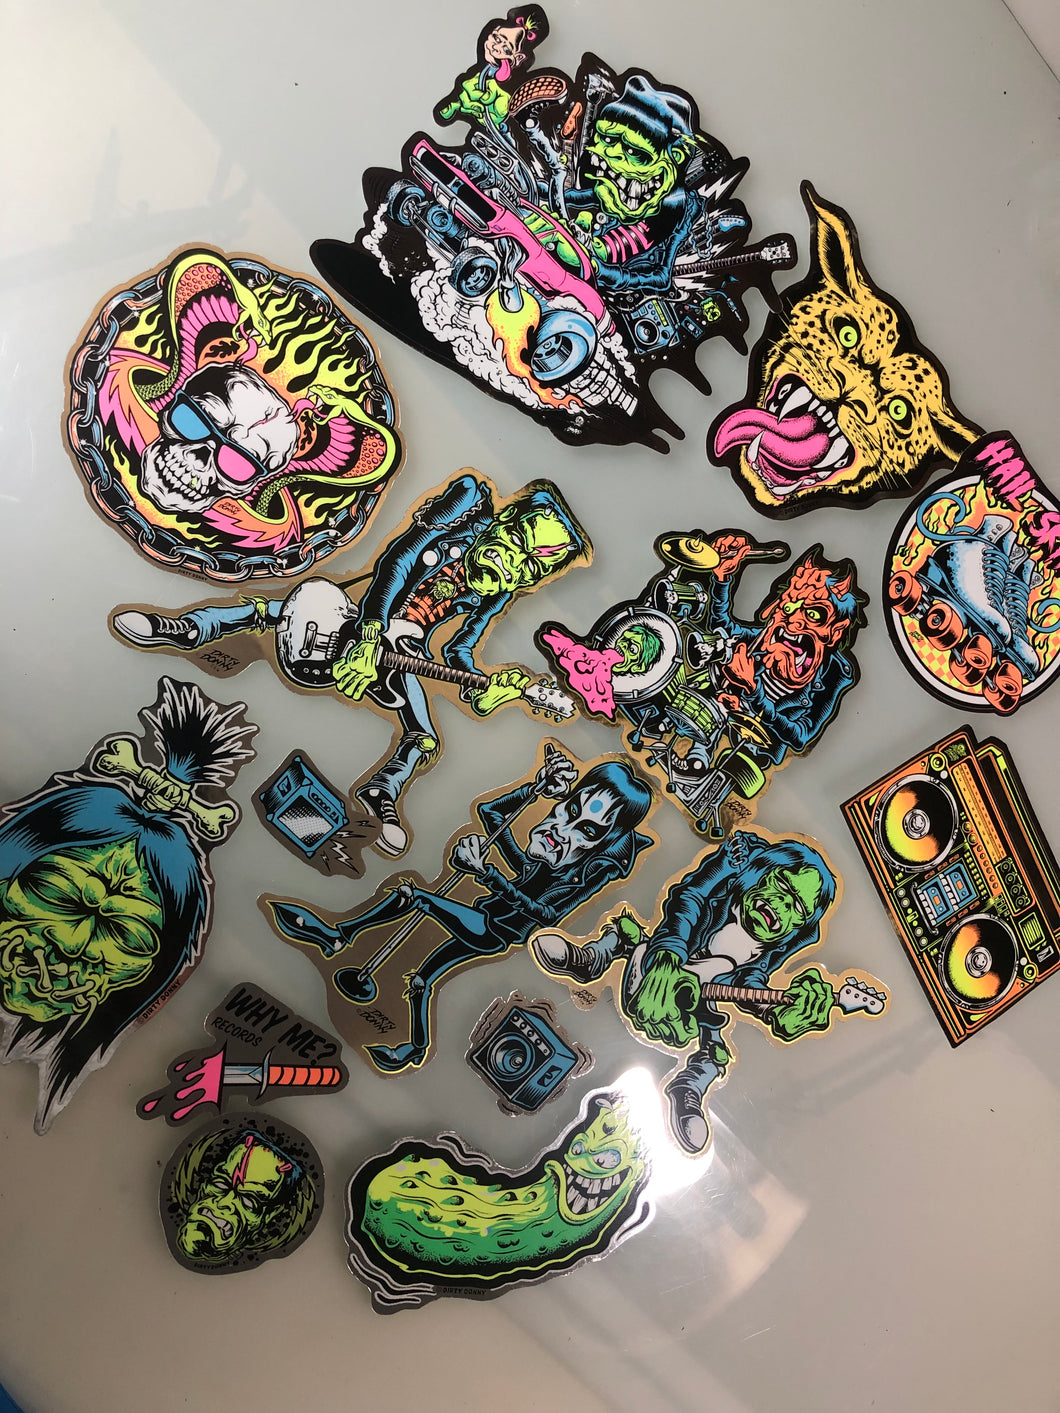 #1 Stickers sets or singles! New Blacklight!